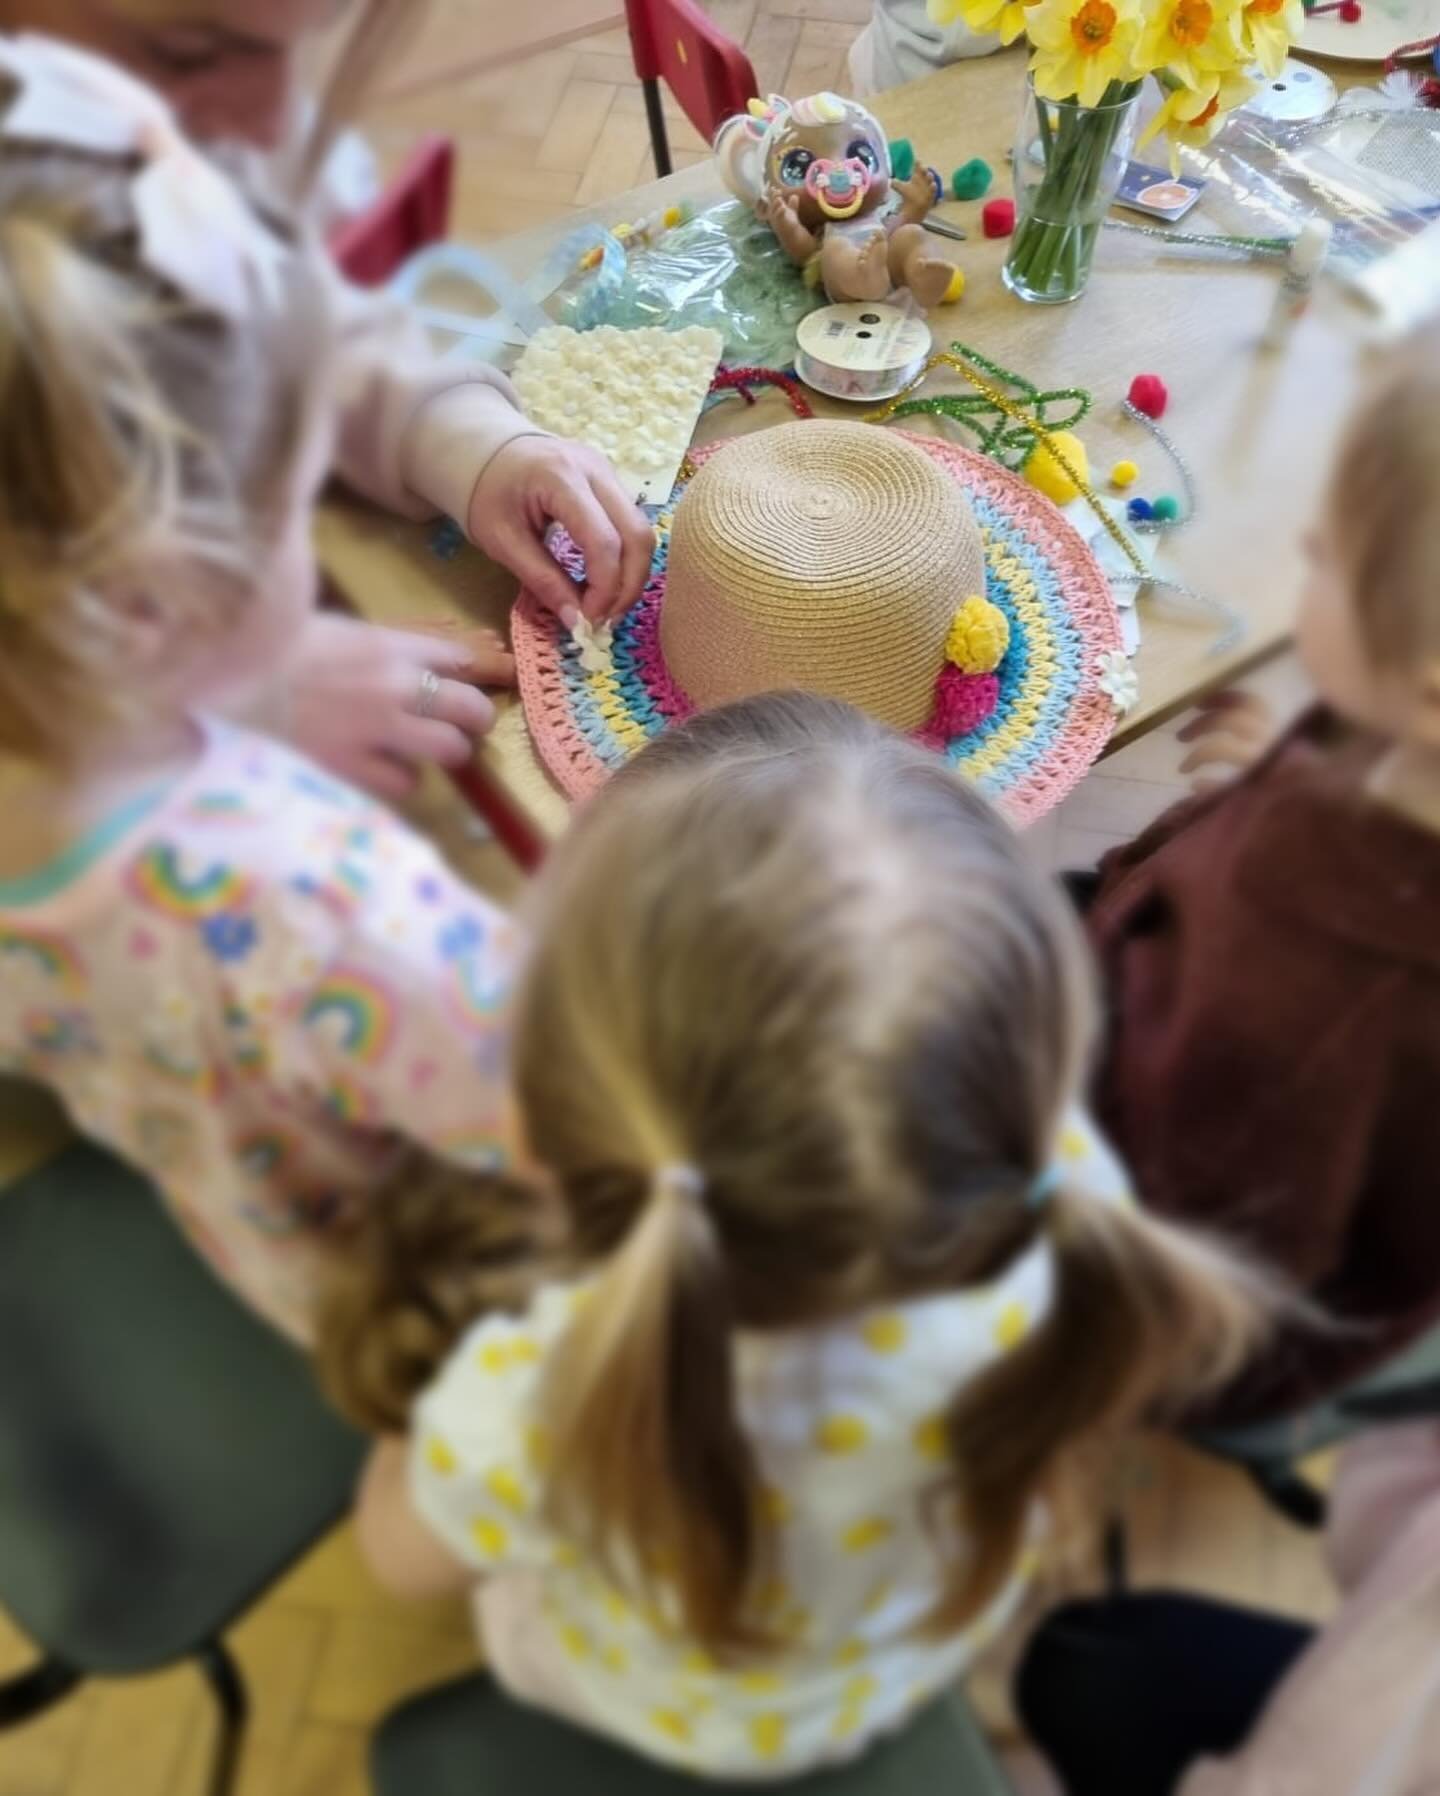 Our Caterpillar children &amp; their parents had so much fun at our &lsquo;Spring Crafts Morning&rsquo; 🪻💐🌻
..
..
Children love nothing more than engaging with their parents in their nursery environment, their little faces light up, lots of playin